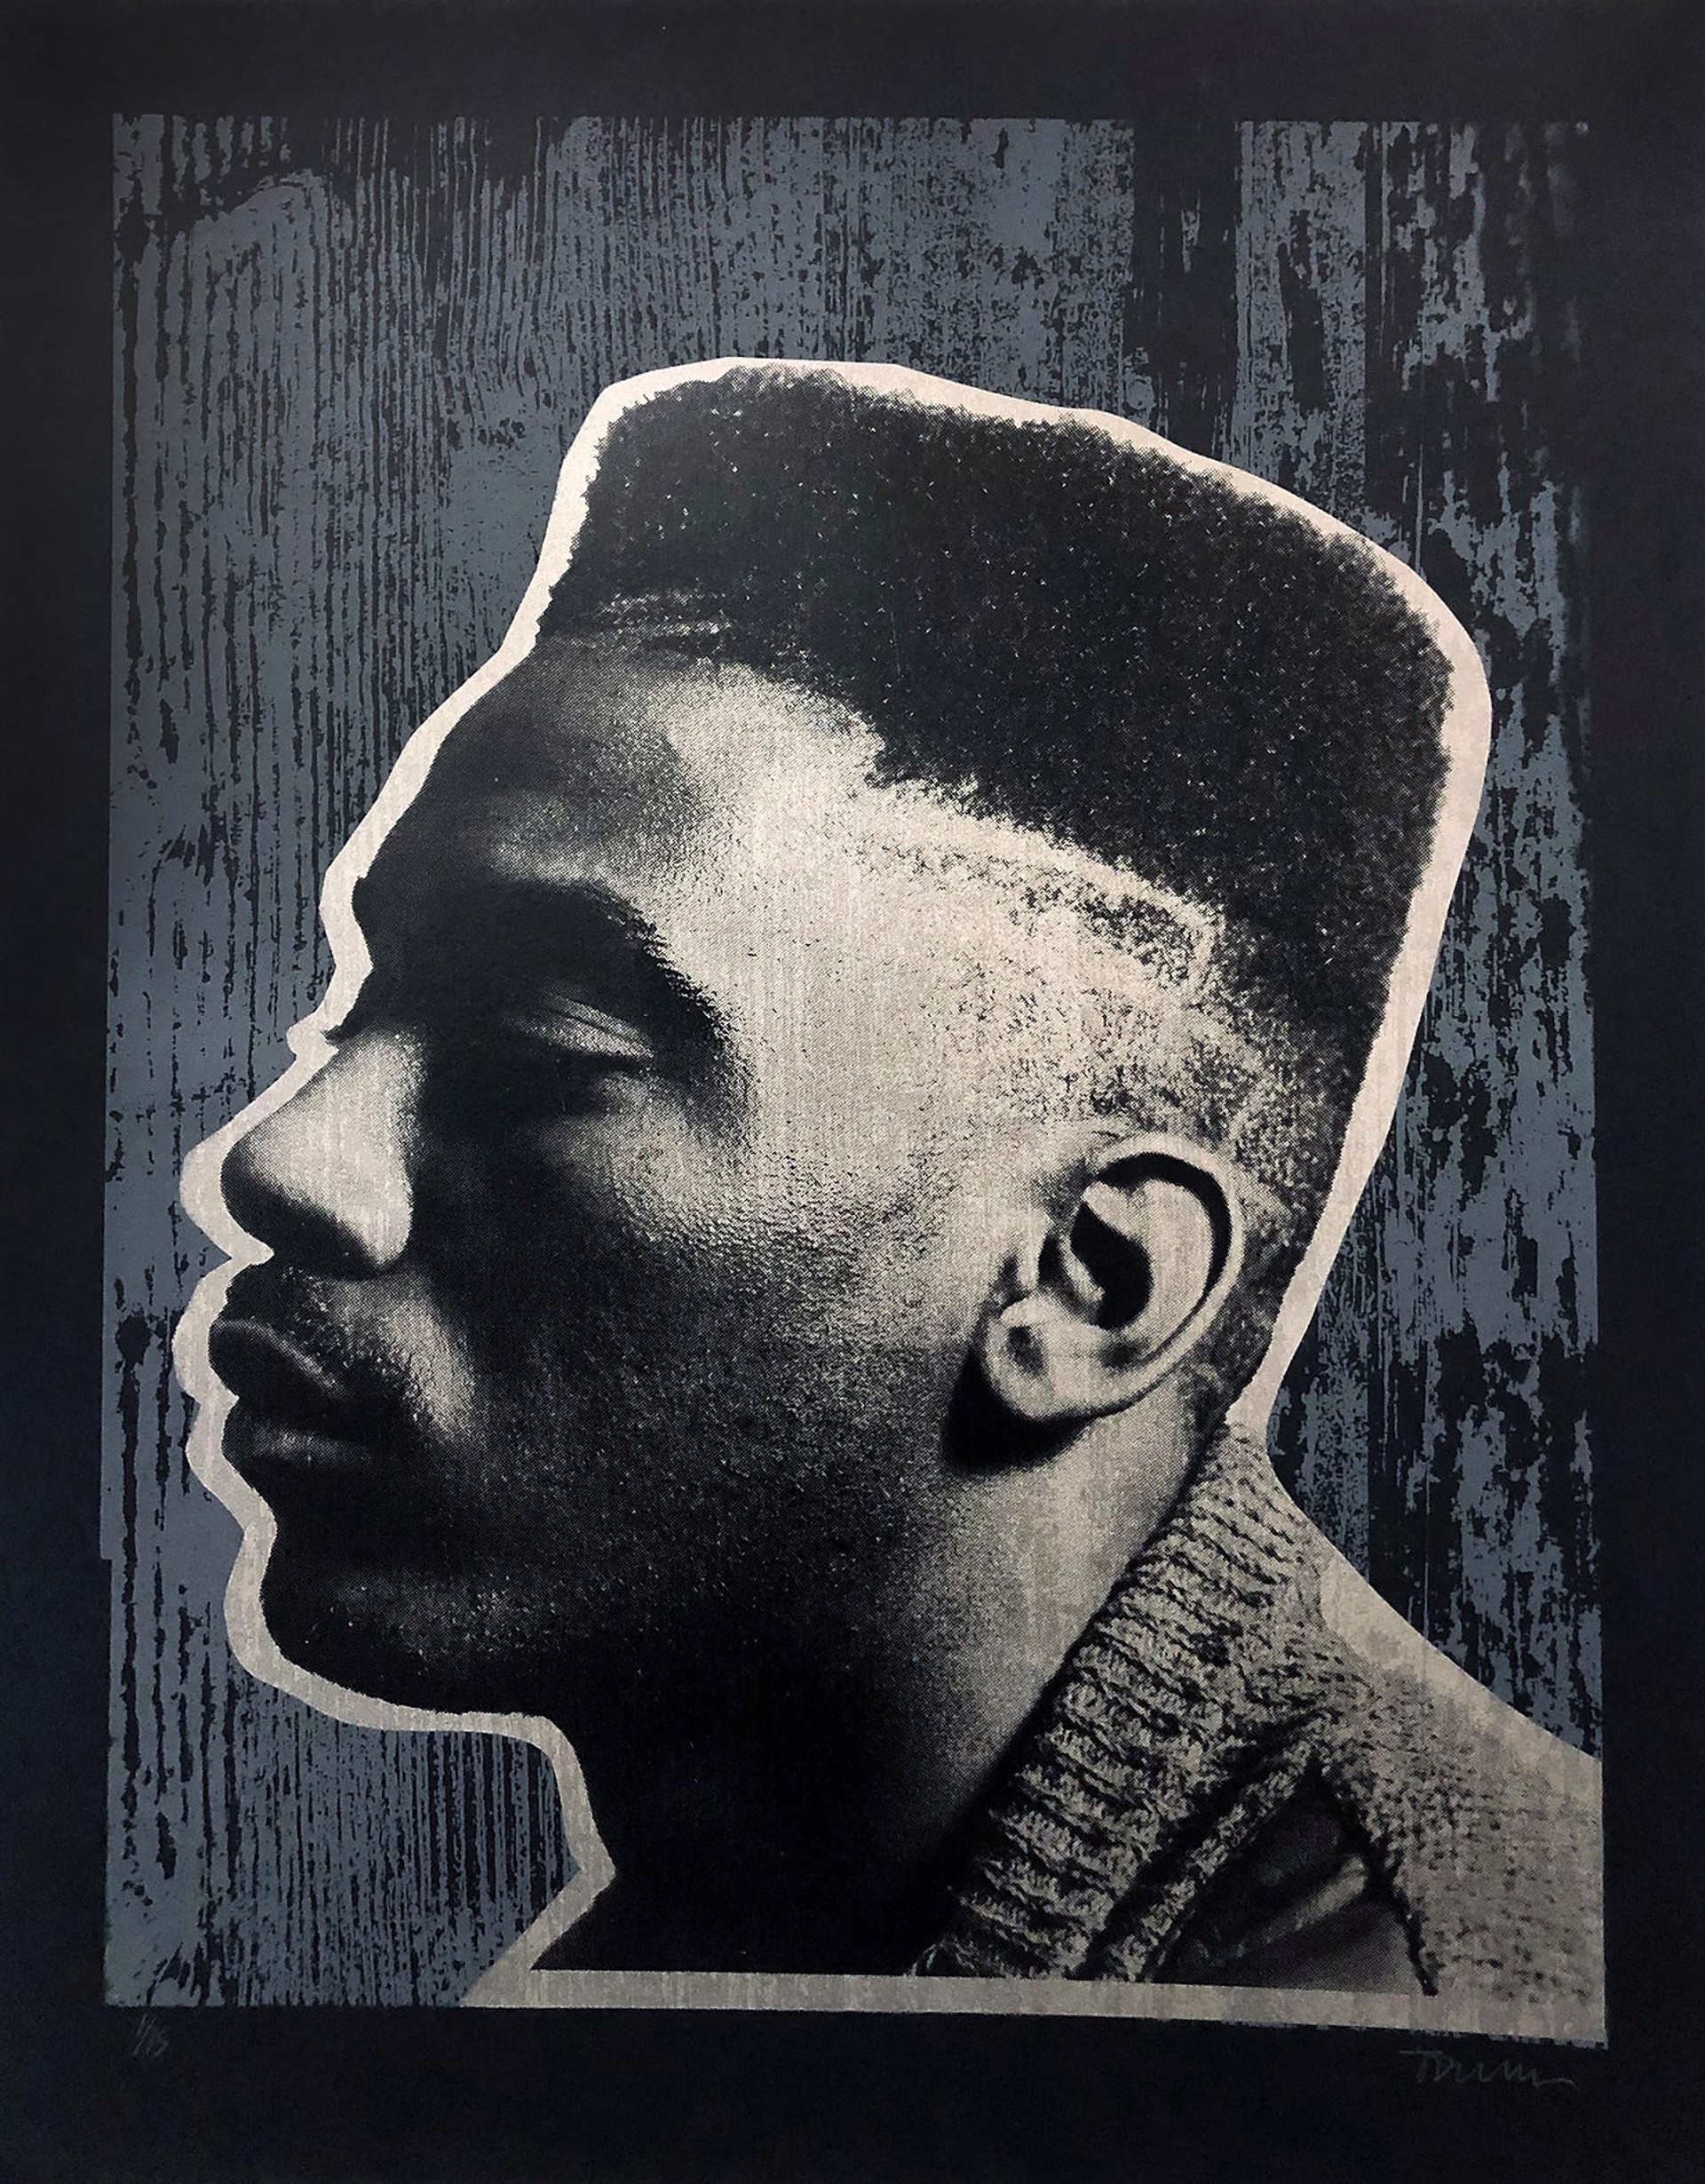 Big Daddy Kane by Janette Beckman